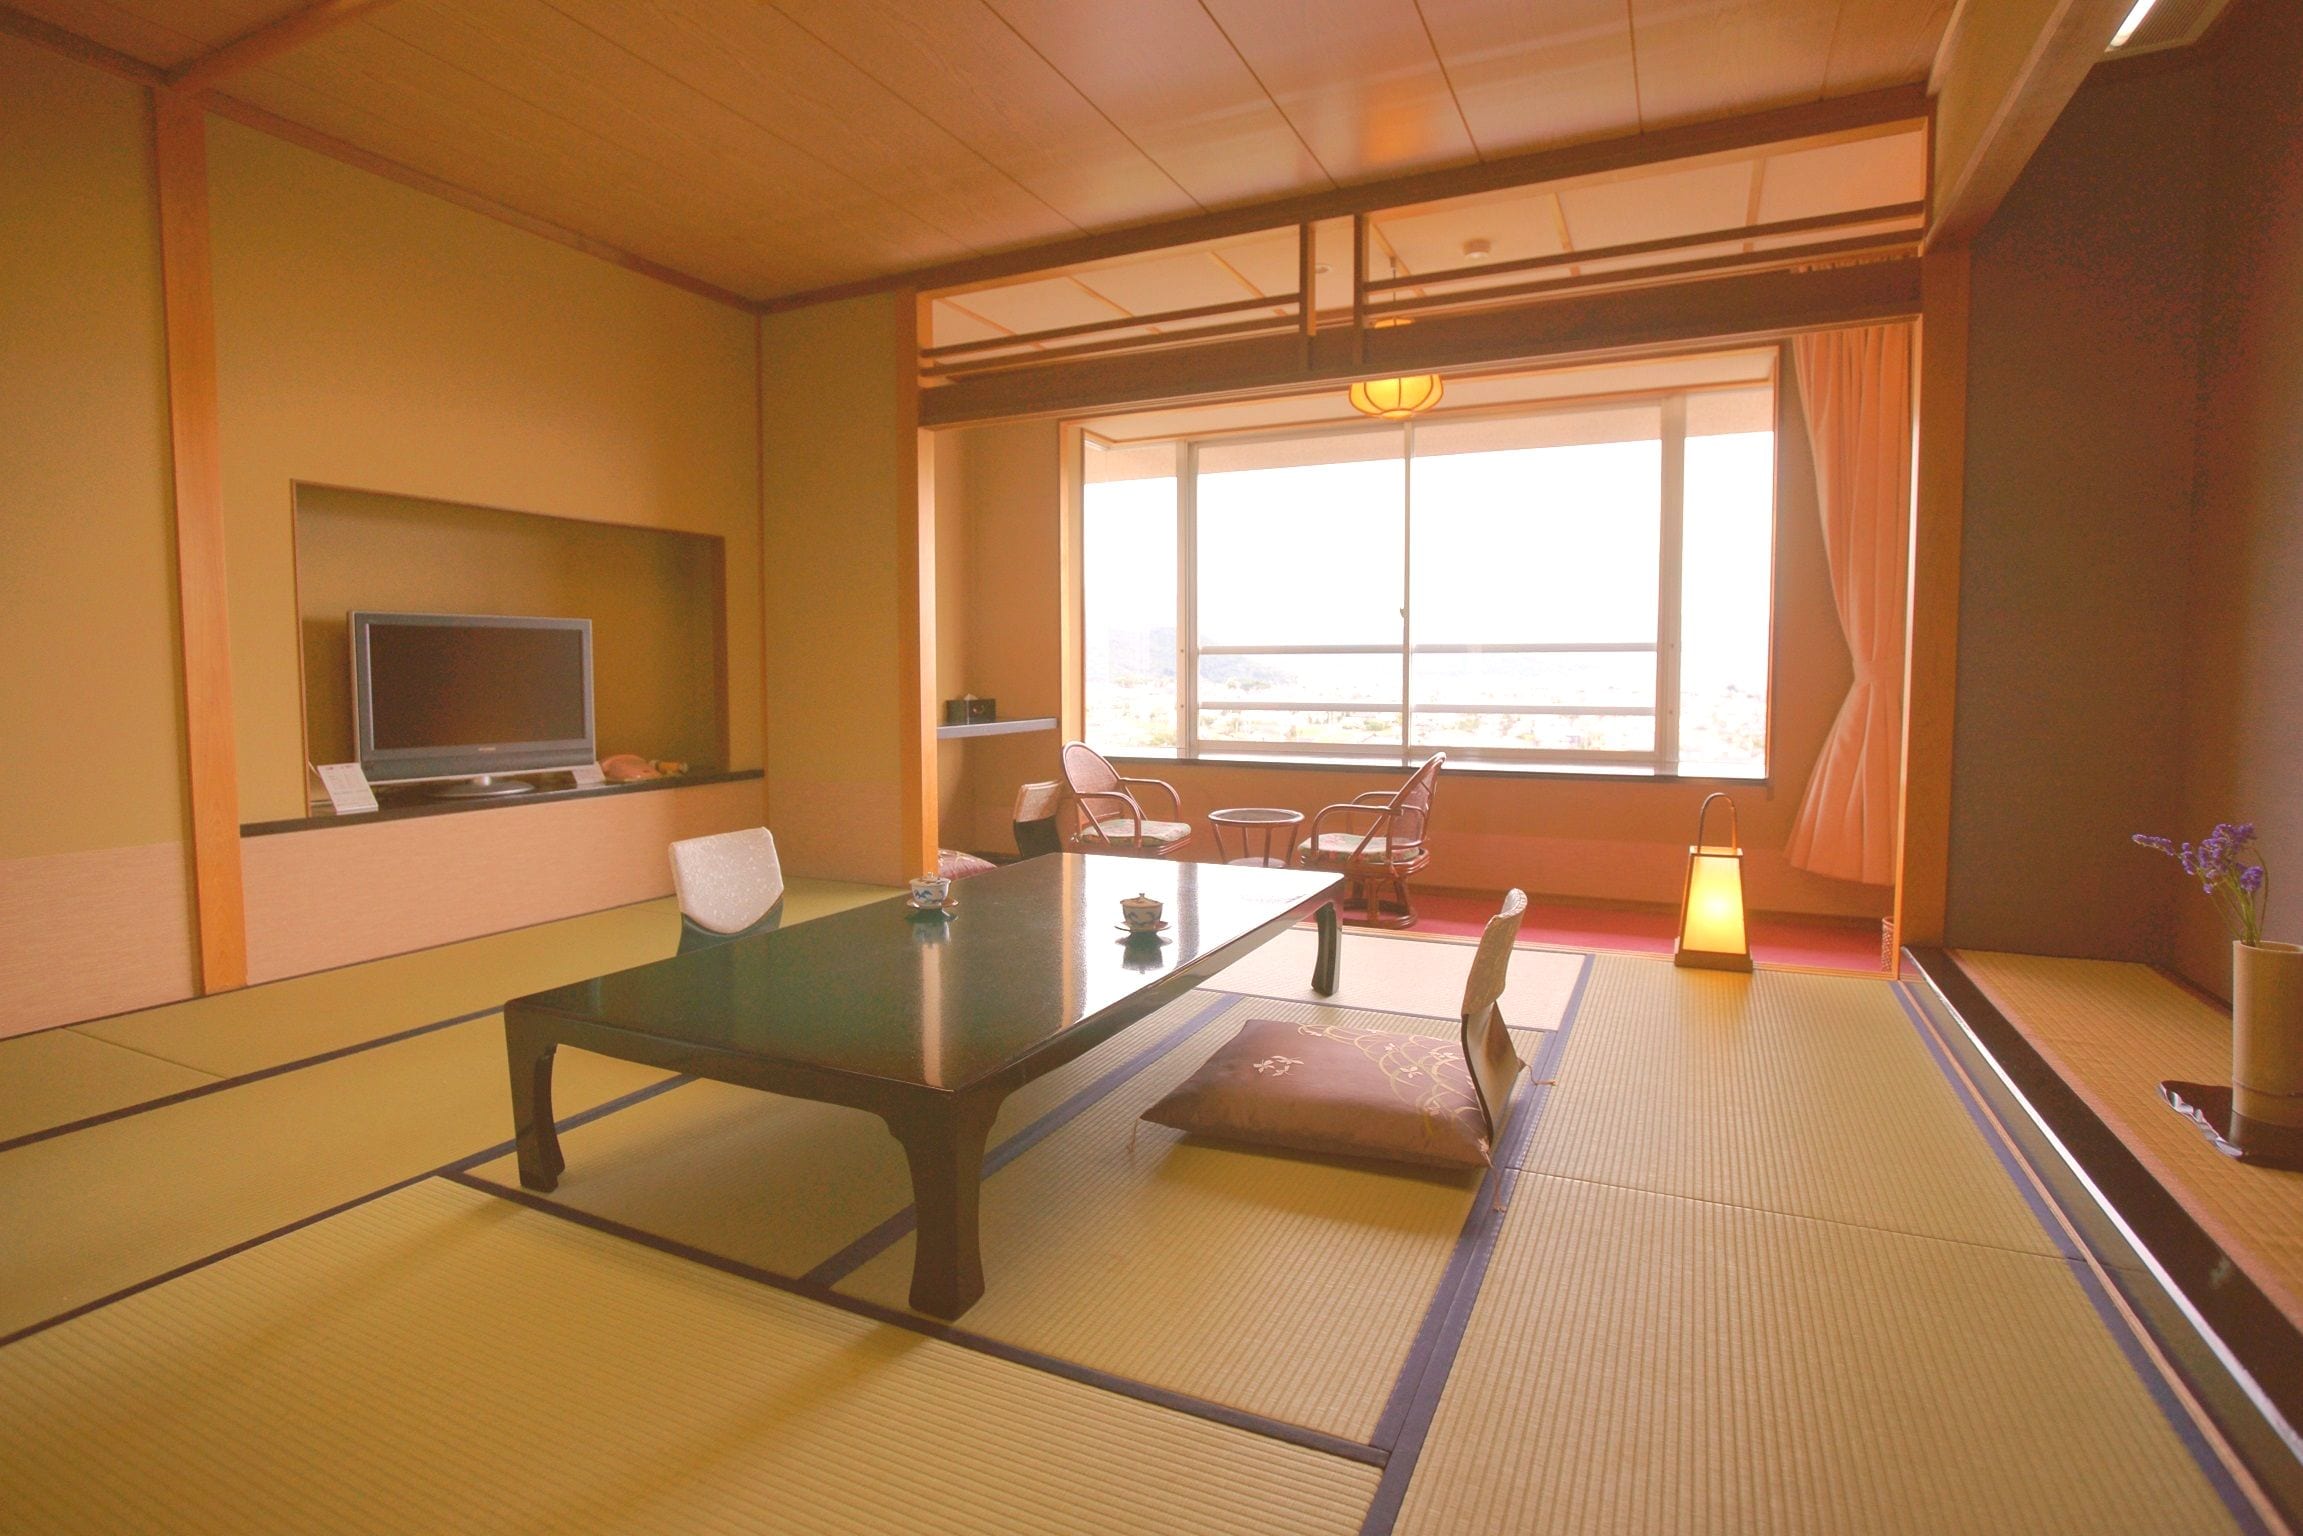 You can overlook Mt. Fuji and the Kofu Basin from the large windows.